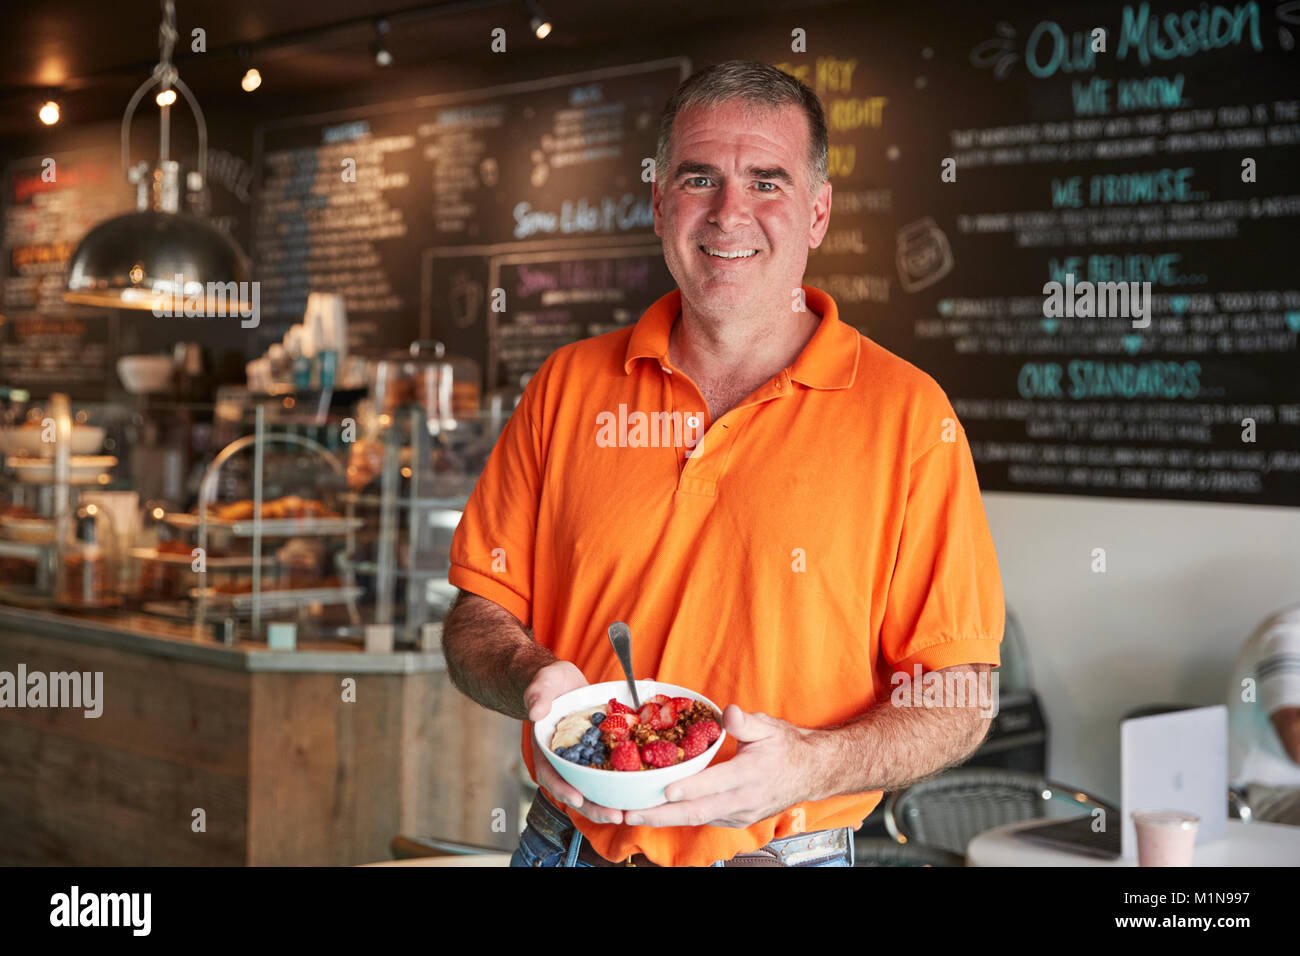 Mature Man Holding Healthy Breakfast In Coffee Shop Stock Photo